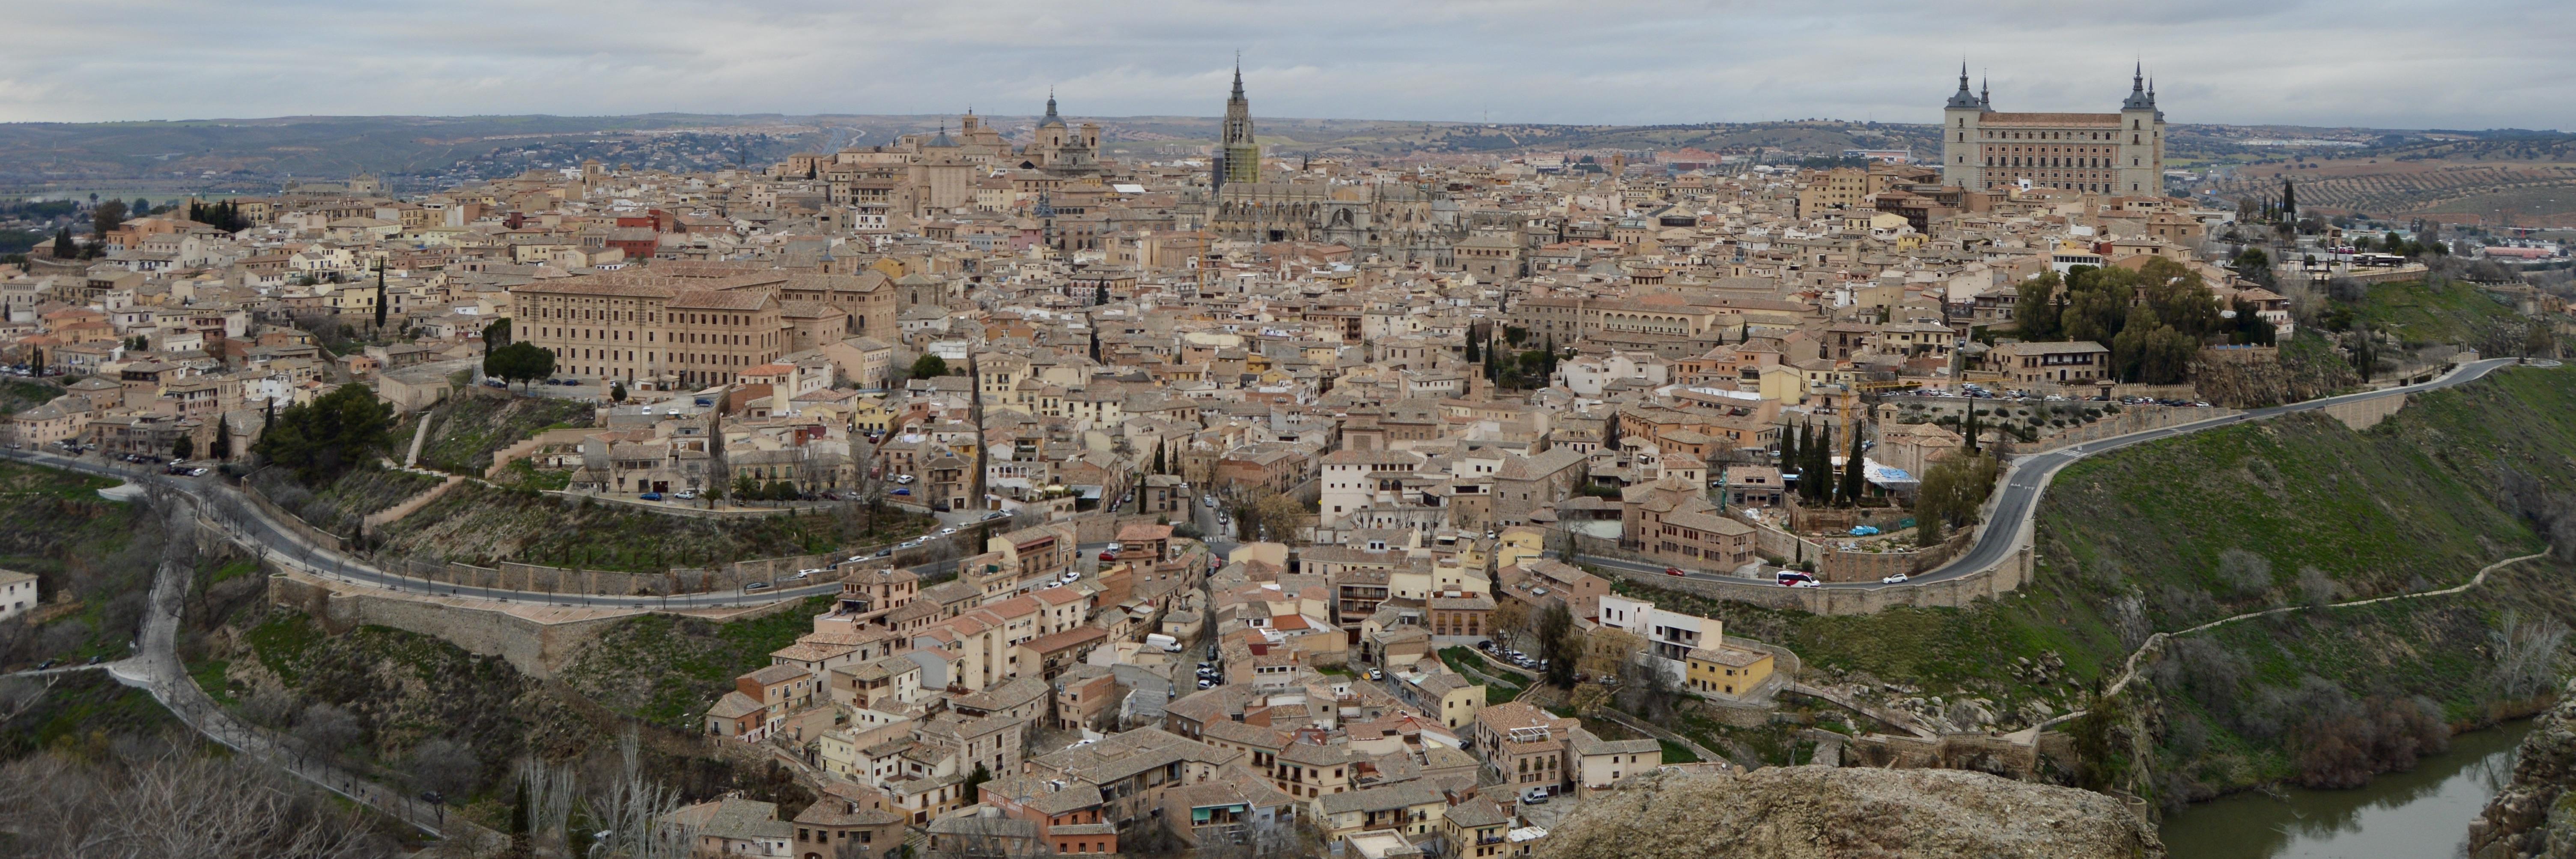 Toledo, Spain from above